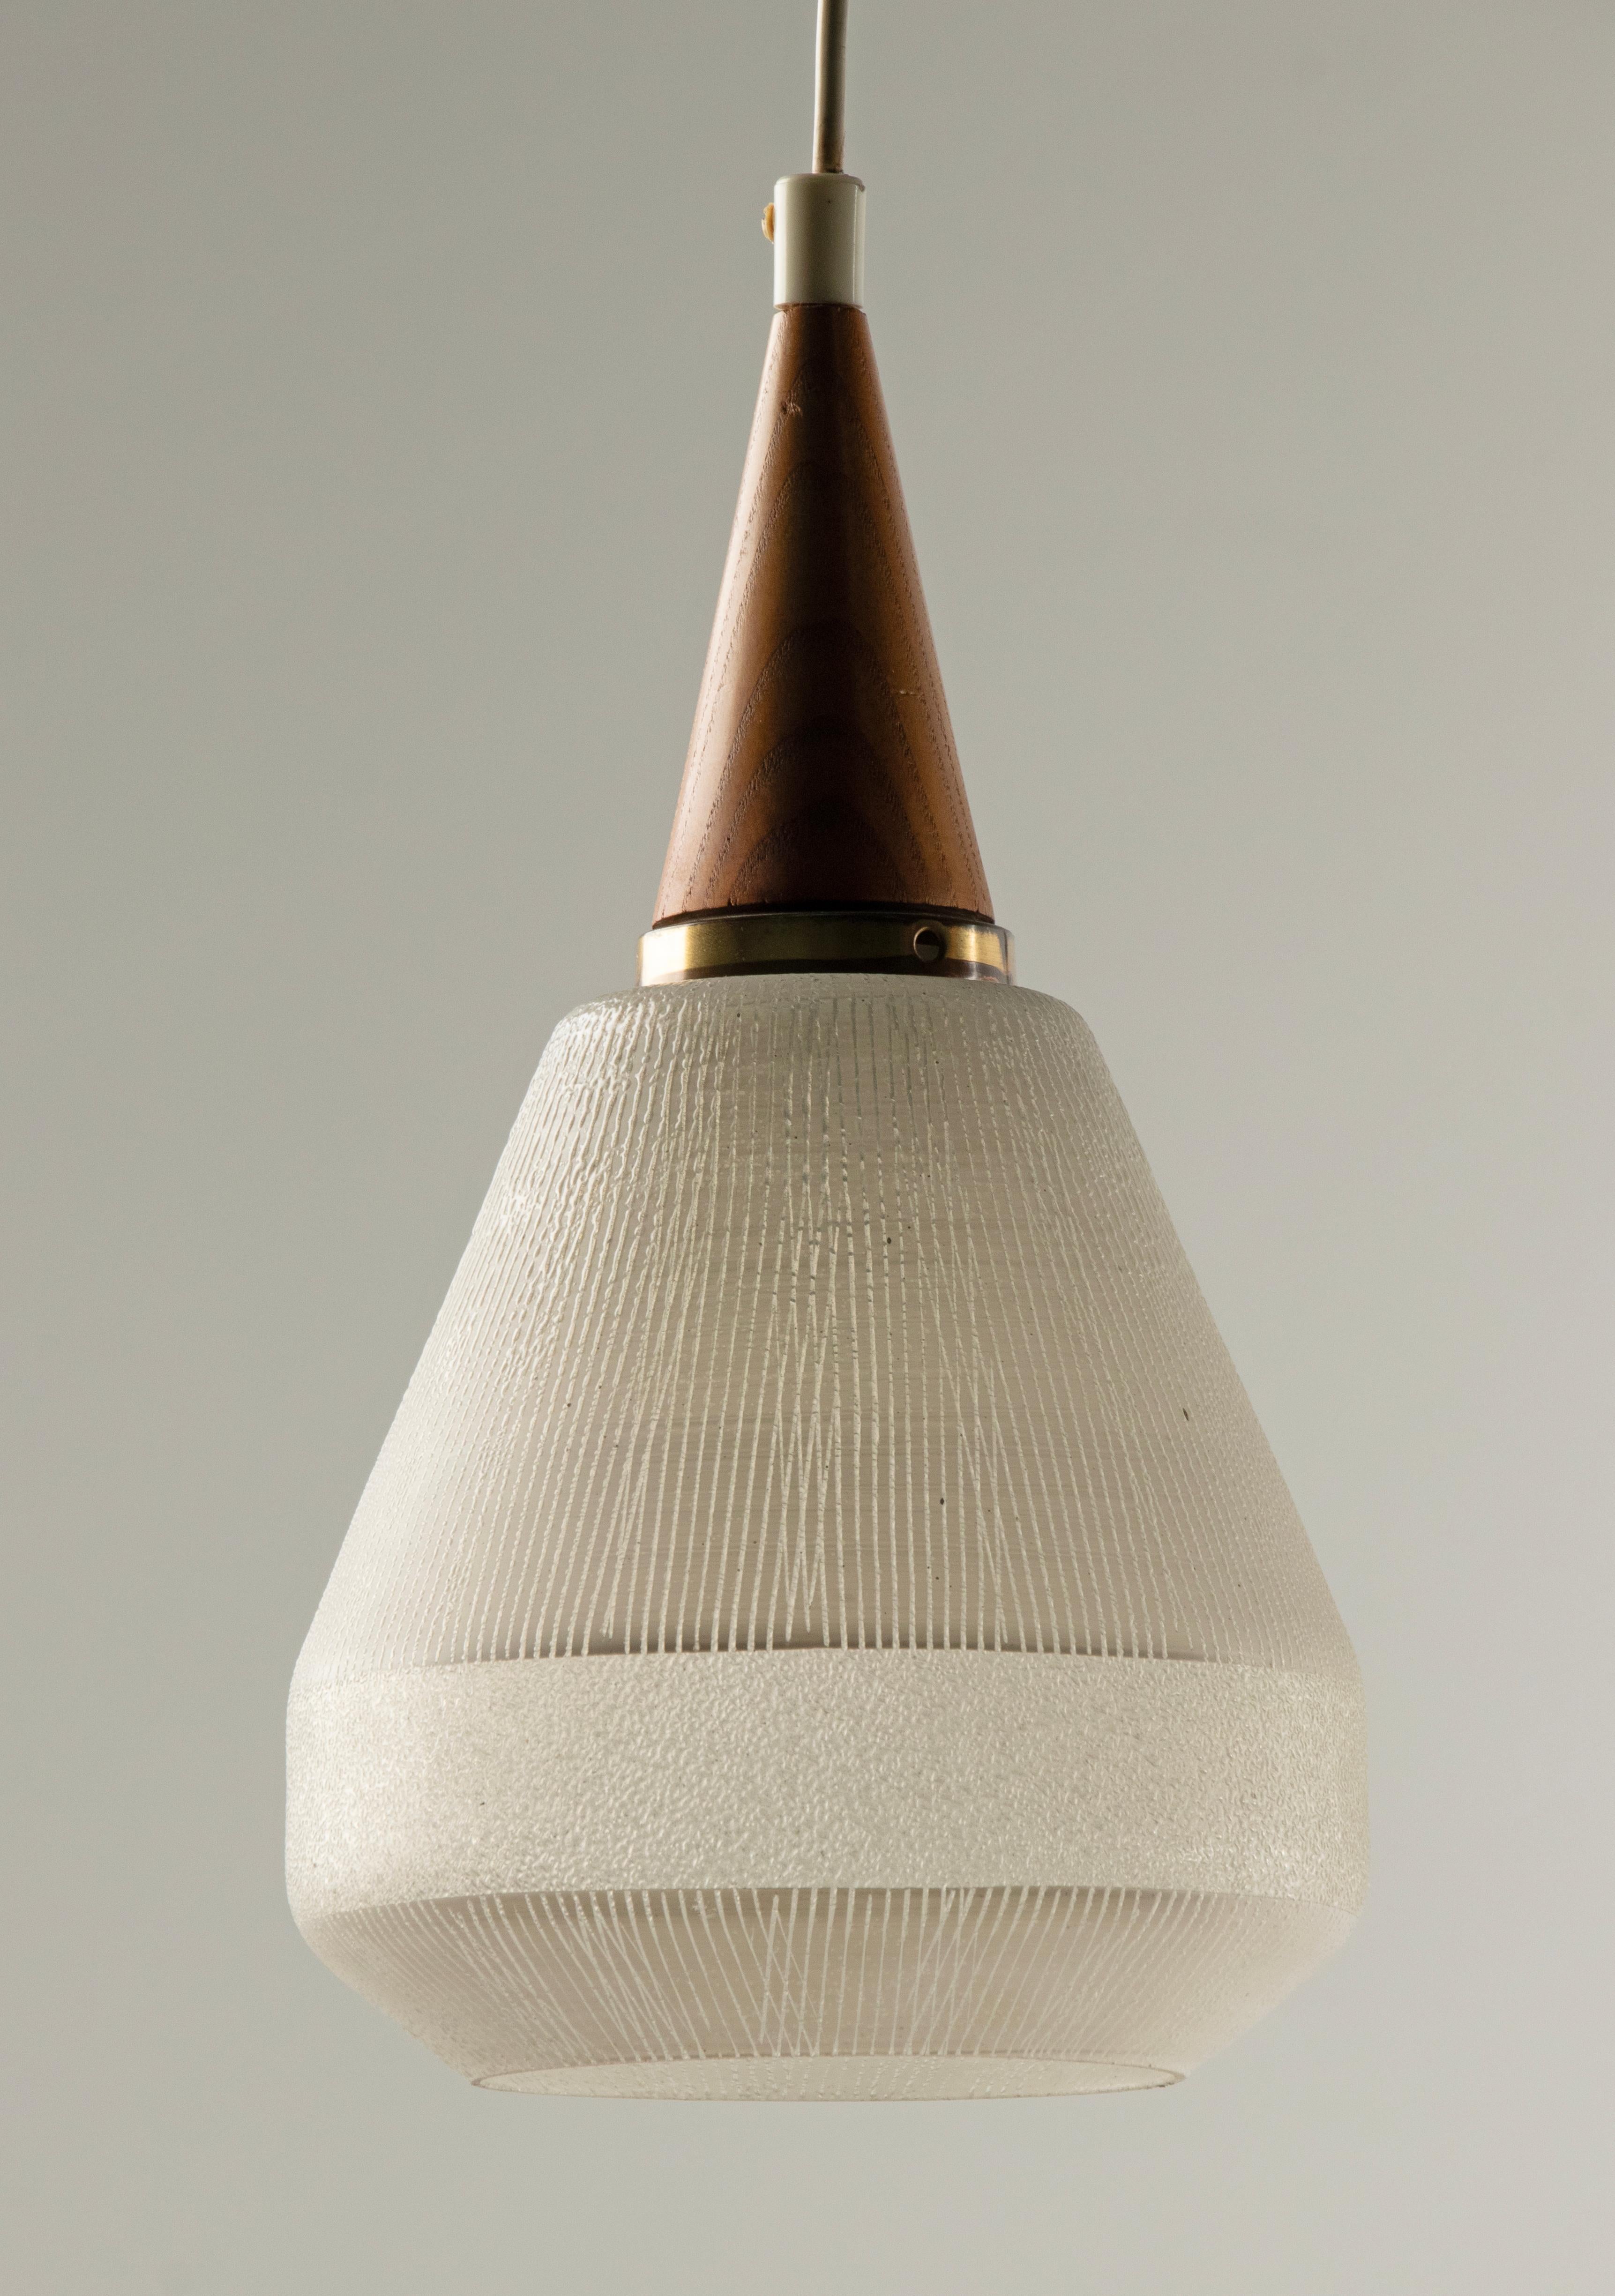 Mid 20th Century Danish Teakwood Pendant Lamp - Frosted Glass Shades For Sale 11